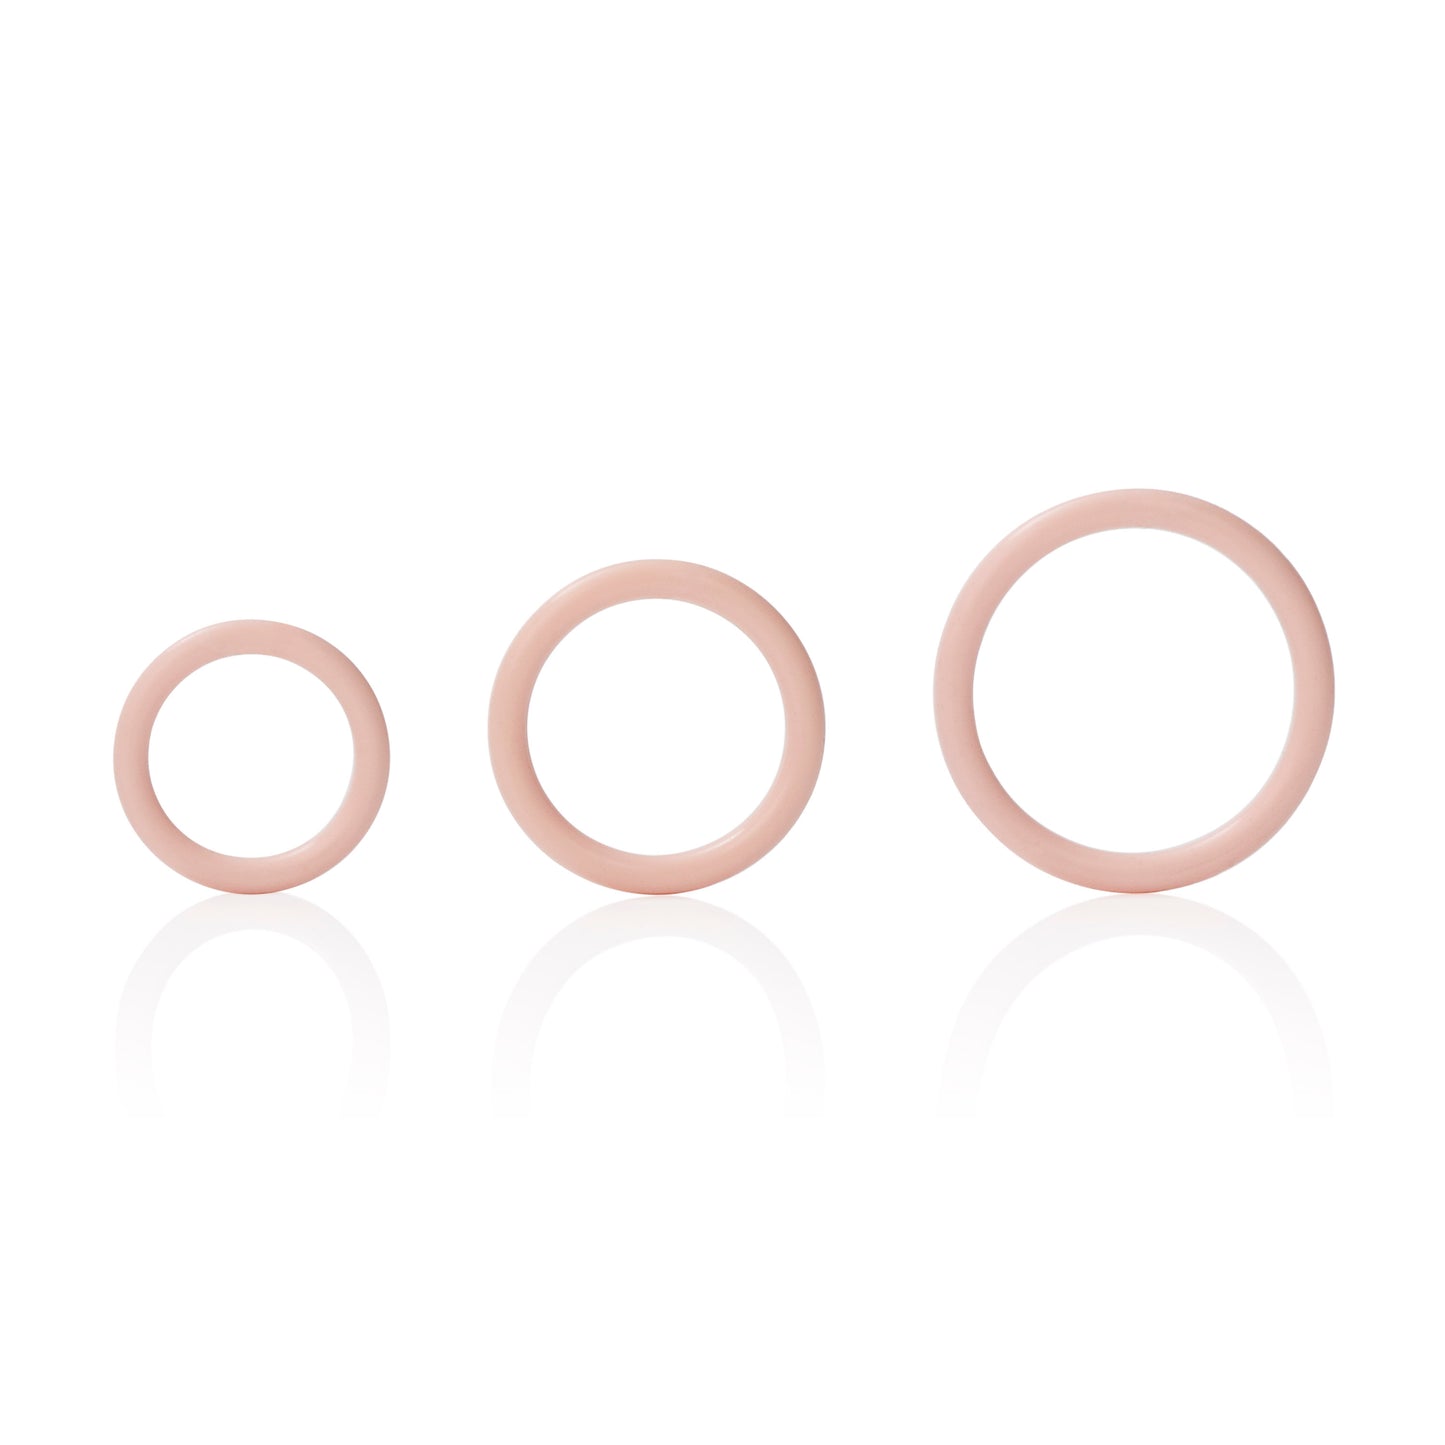 Silicone Support Rings - Ivory SE1455302